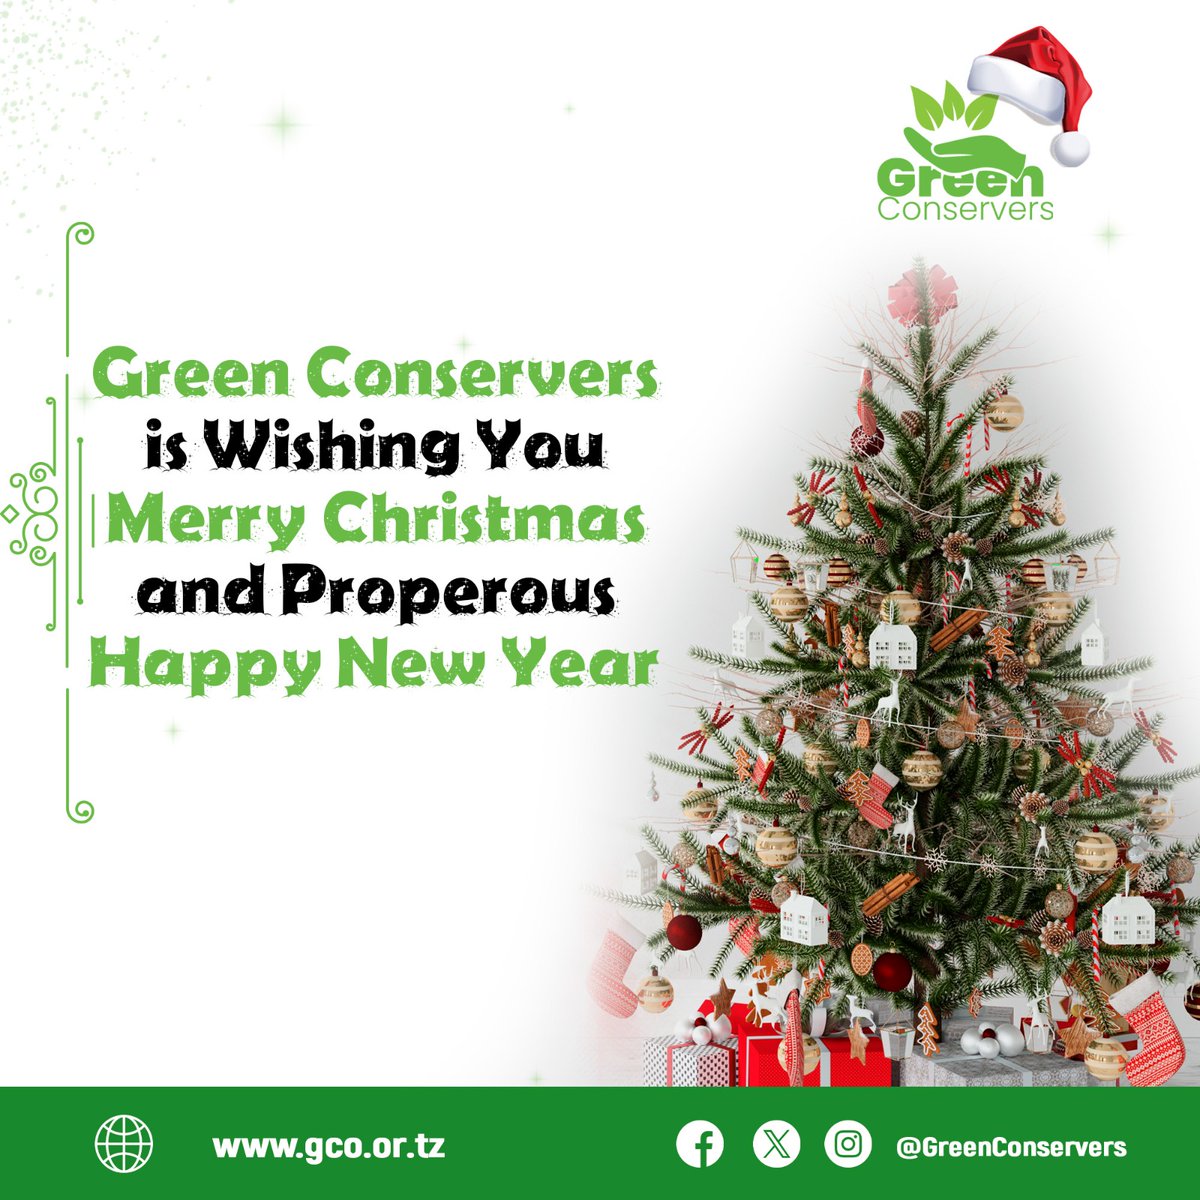 Sending eco-love and green cheer your way this Christmas! May your New Year be filled with sustainable resolutions and positive environmental impact! 🎄💚 #GreenChristmas #Happy2024 #SustainableCelebrations
@350 @350Africa @stopEACOP @GreenFaith_Afr @ZakiMamdoo @merynewarah